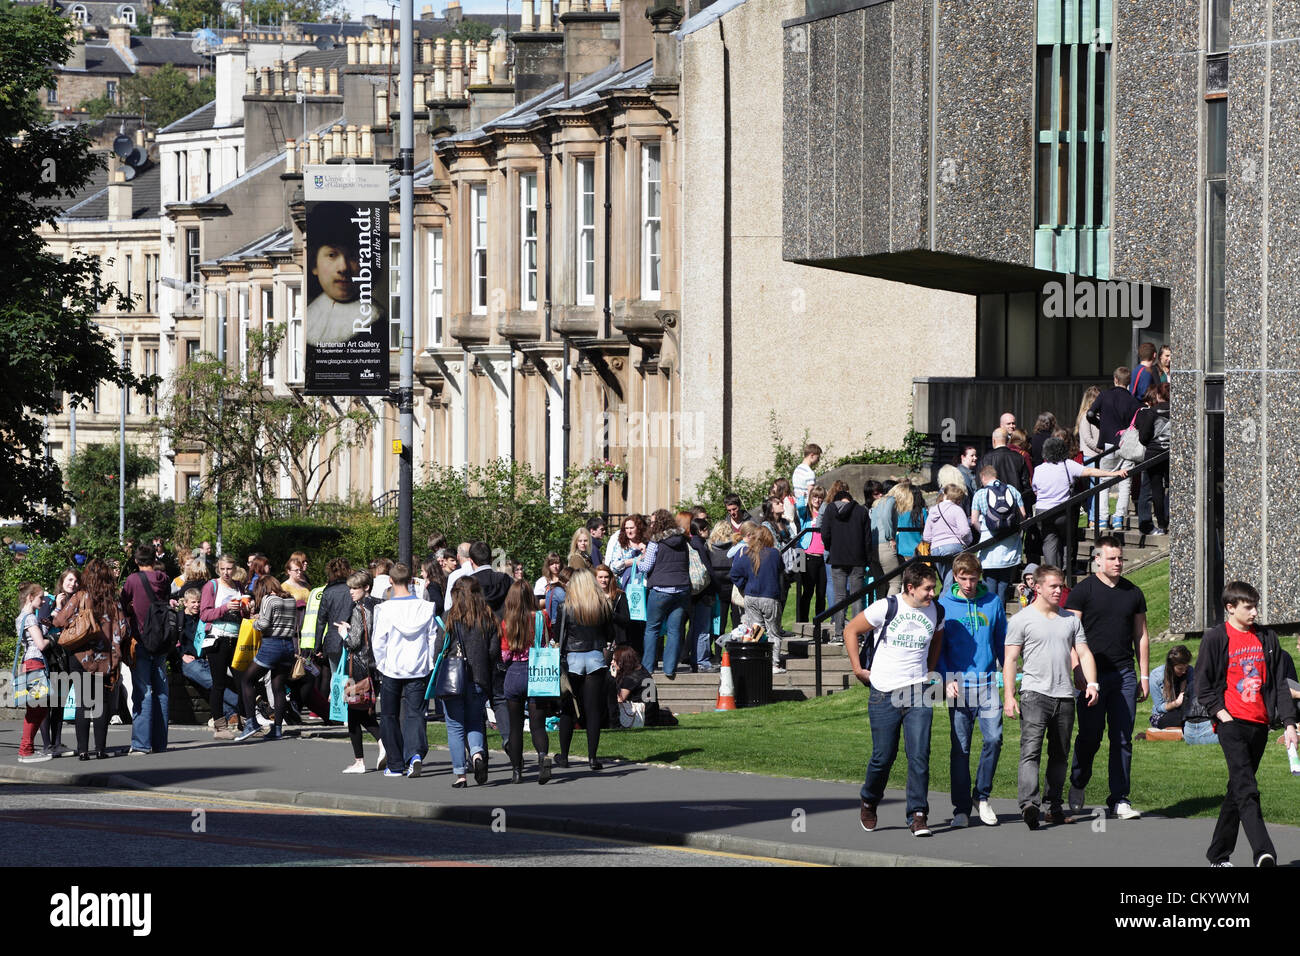 University Avenue, Glasgow, Scotland, UK, Wednesday, 5th September, 2012. People queuing outside the Boyd Orr Building at the Gilmorehill Campus on to take part in a busy University of Glasgow Undergraduate Open Day. Stock Photo